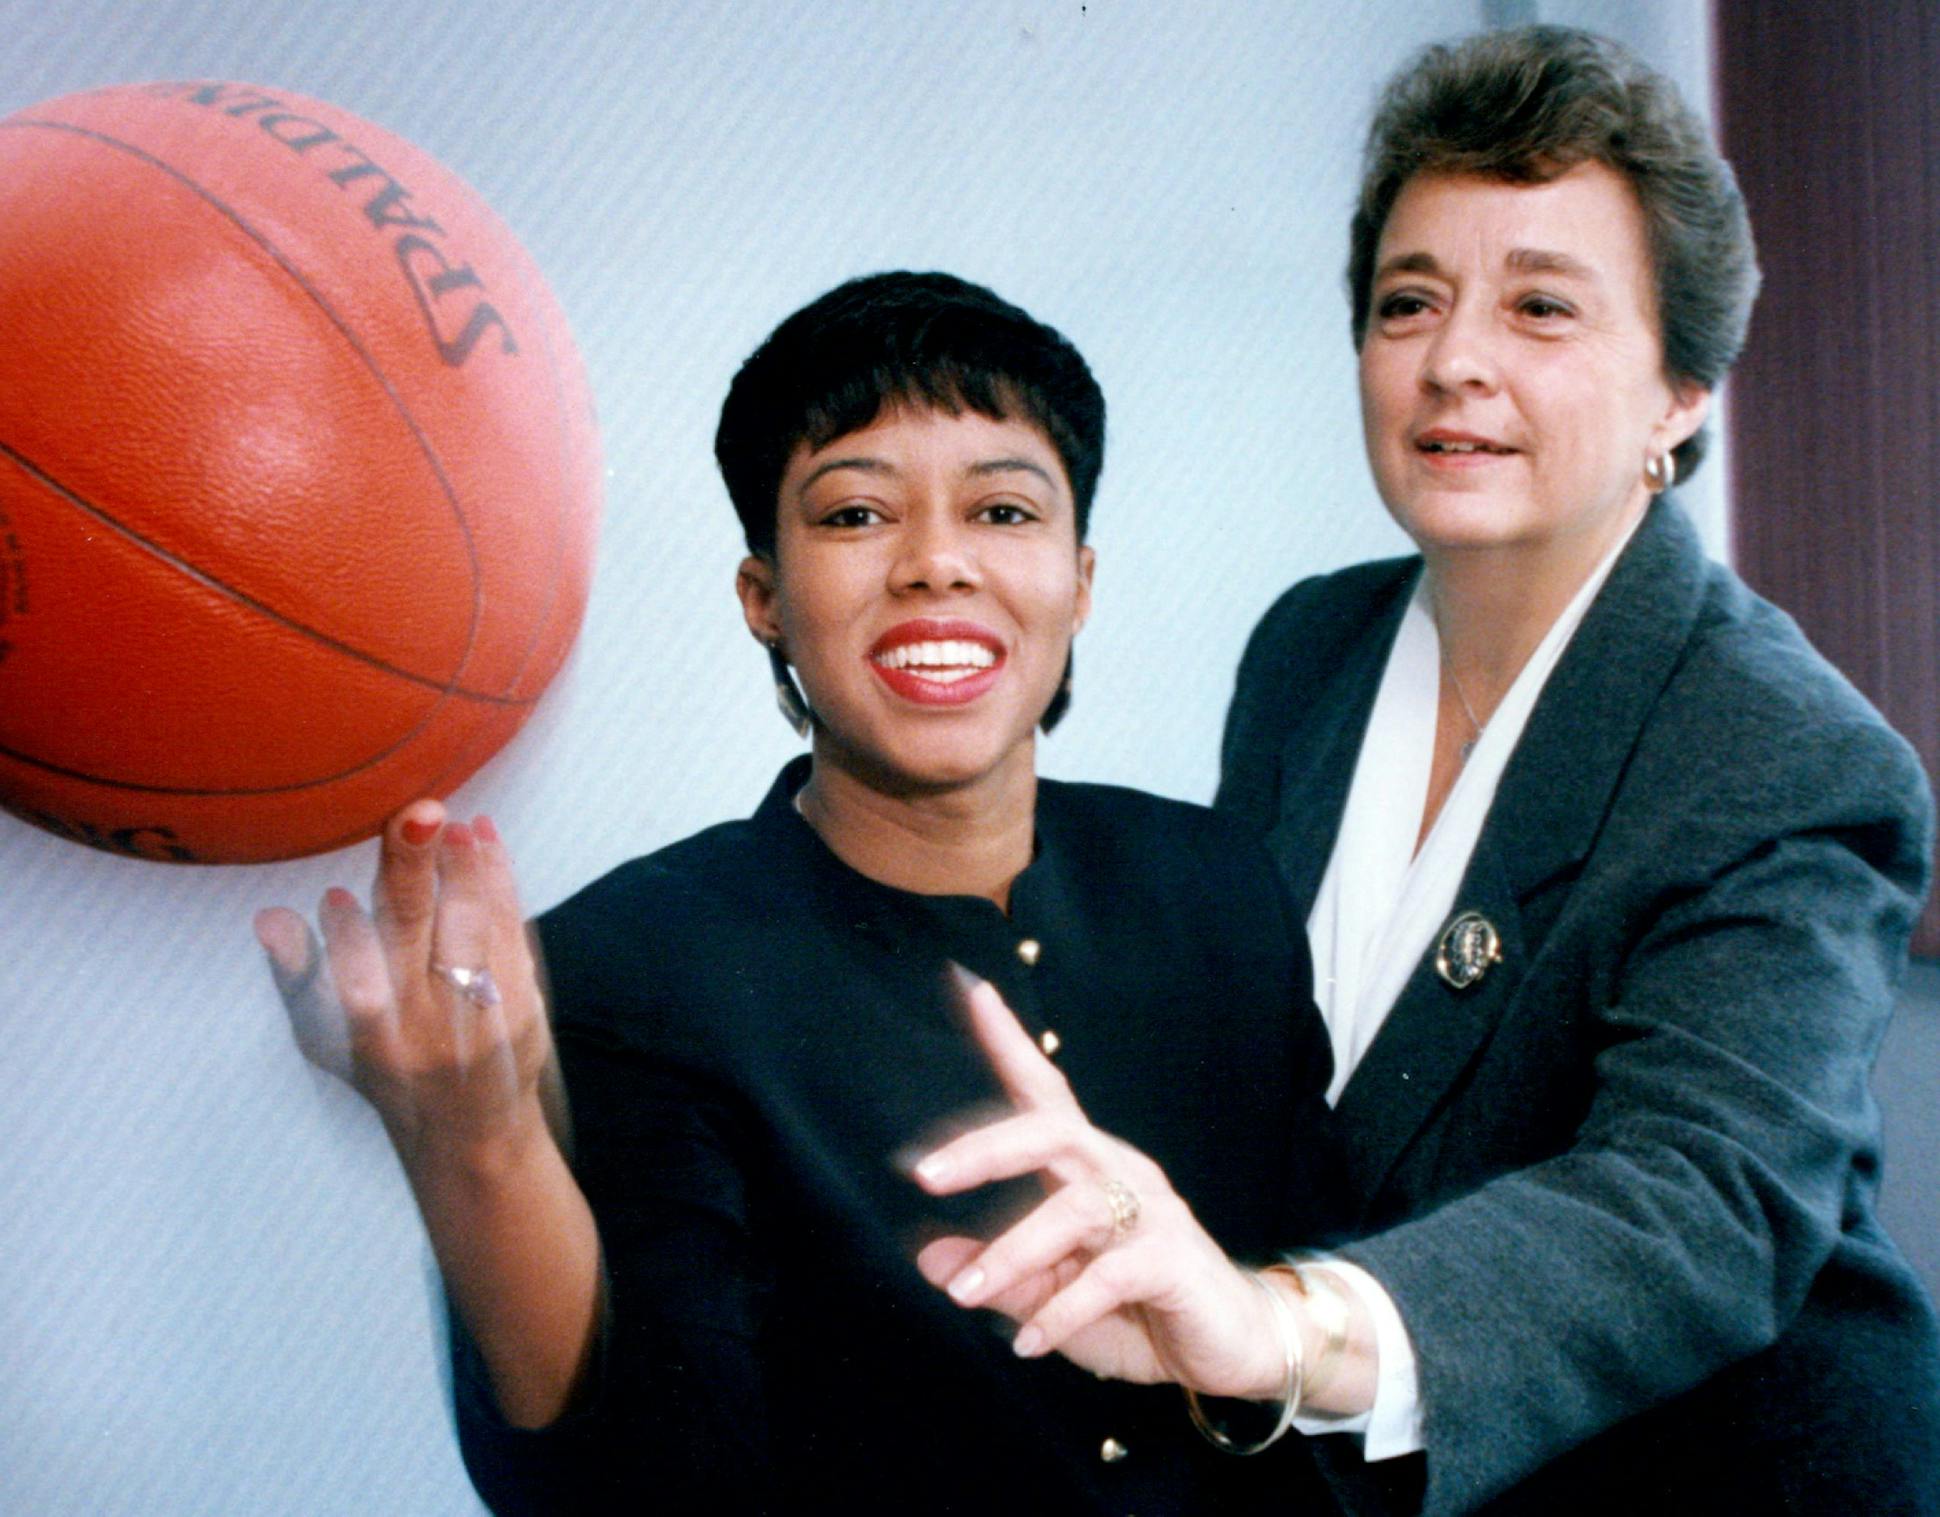 Associate directors of the Minnesota State High School league for Women's Sports Day. Lisa Lissimore (left) and Dorothy McIntyre (right) trying to pass a spinning basketball.